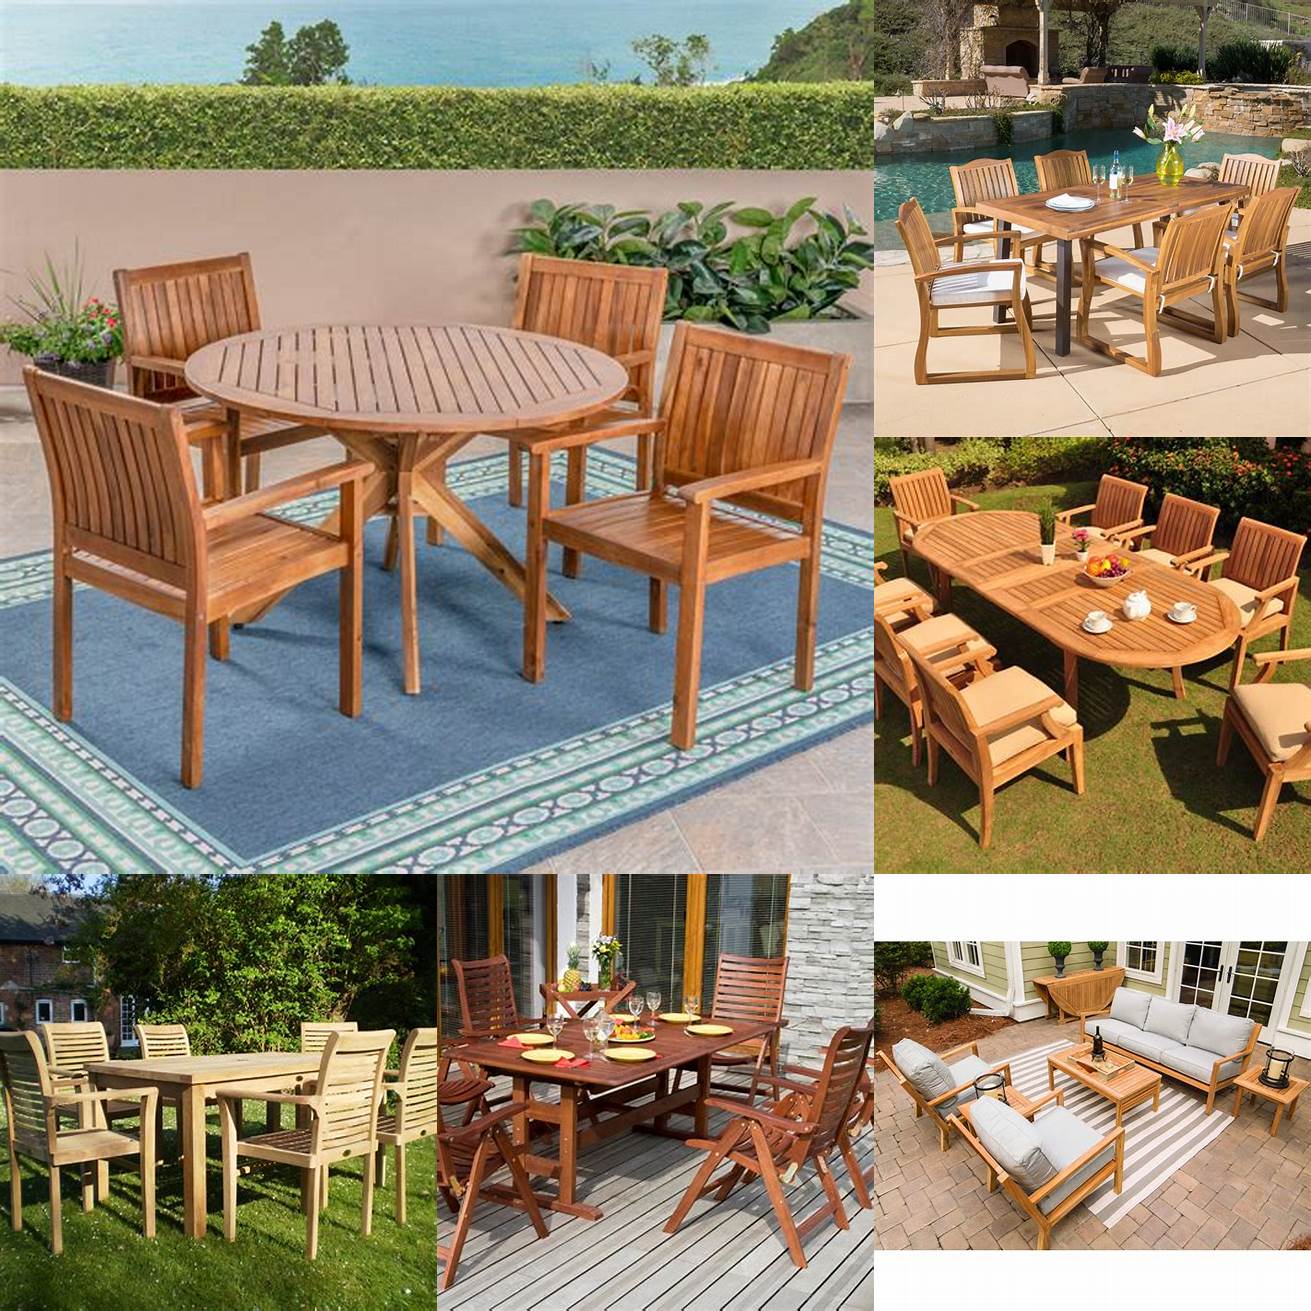 Teak Wood Patio Furniture on a Deck or Patio